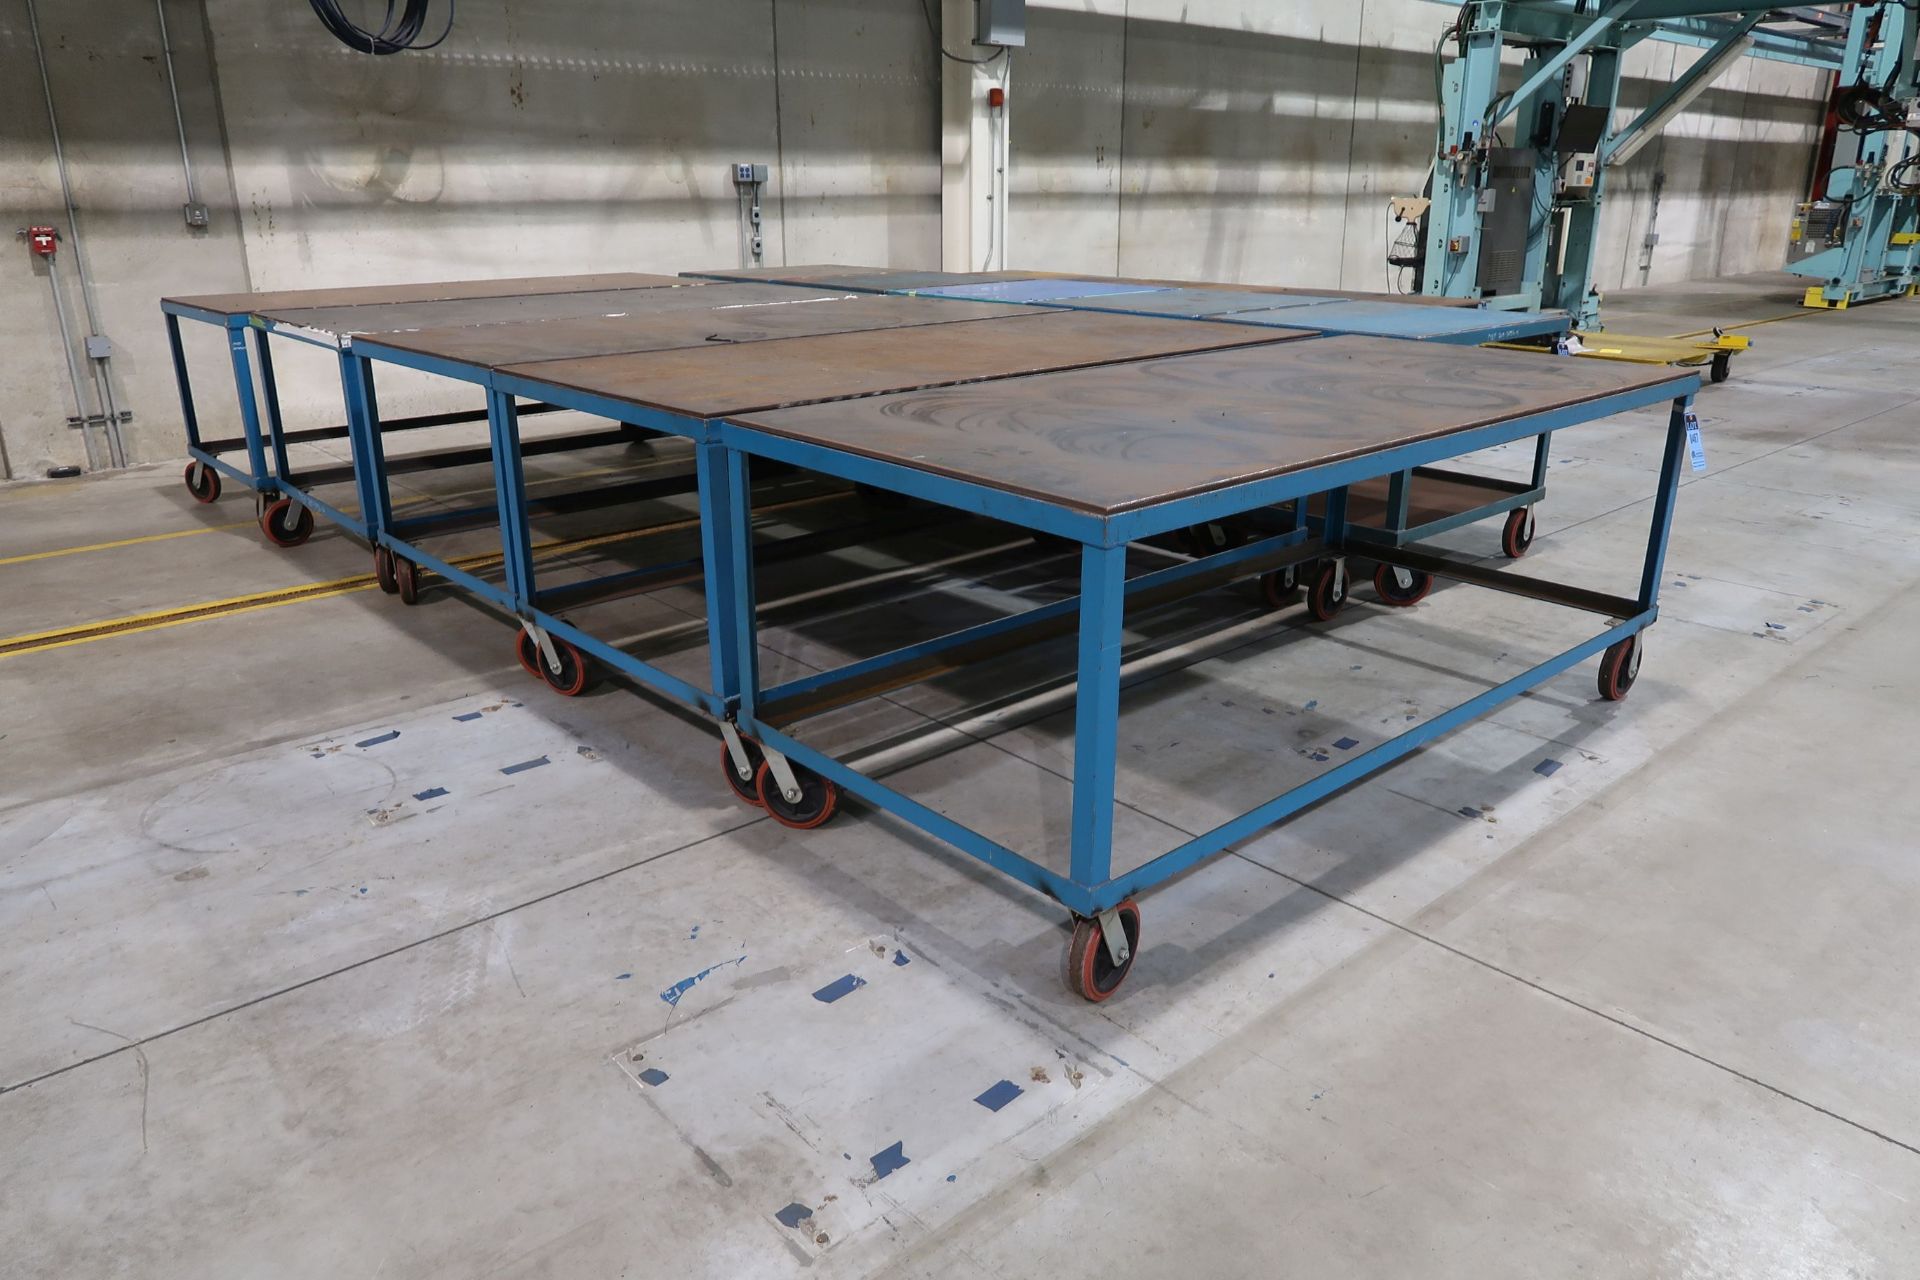 44" X 96" X 38-1/2" HIGH X 1/2" THICK STEEL TOP PLATE PORTABLE STEEL FRAME TABLES